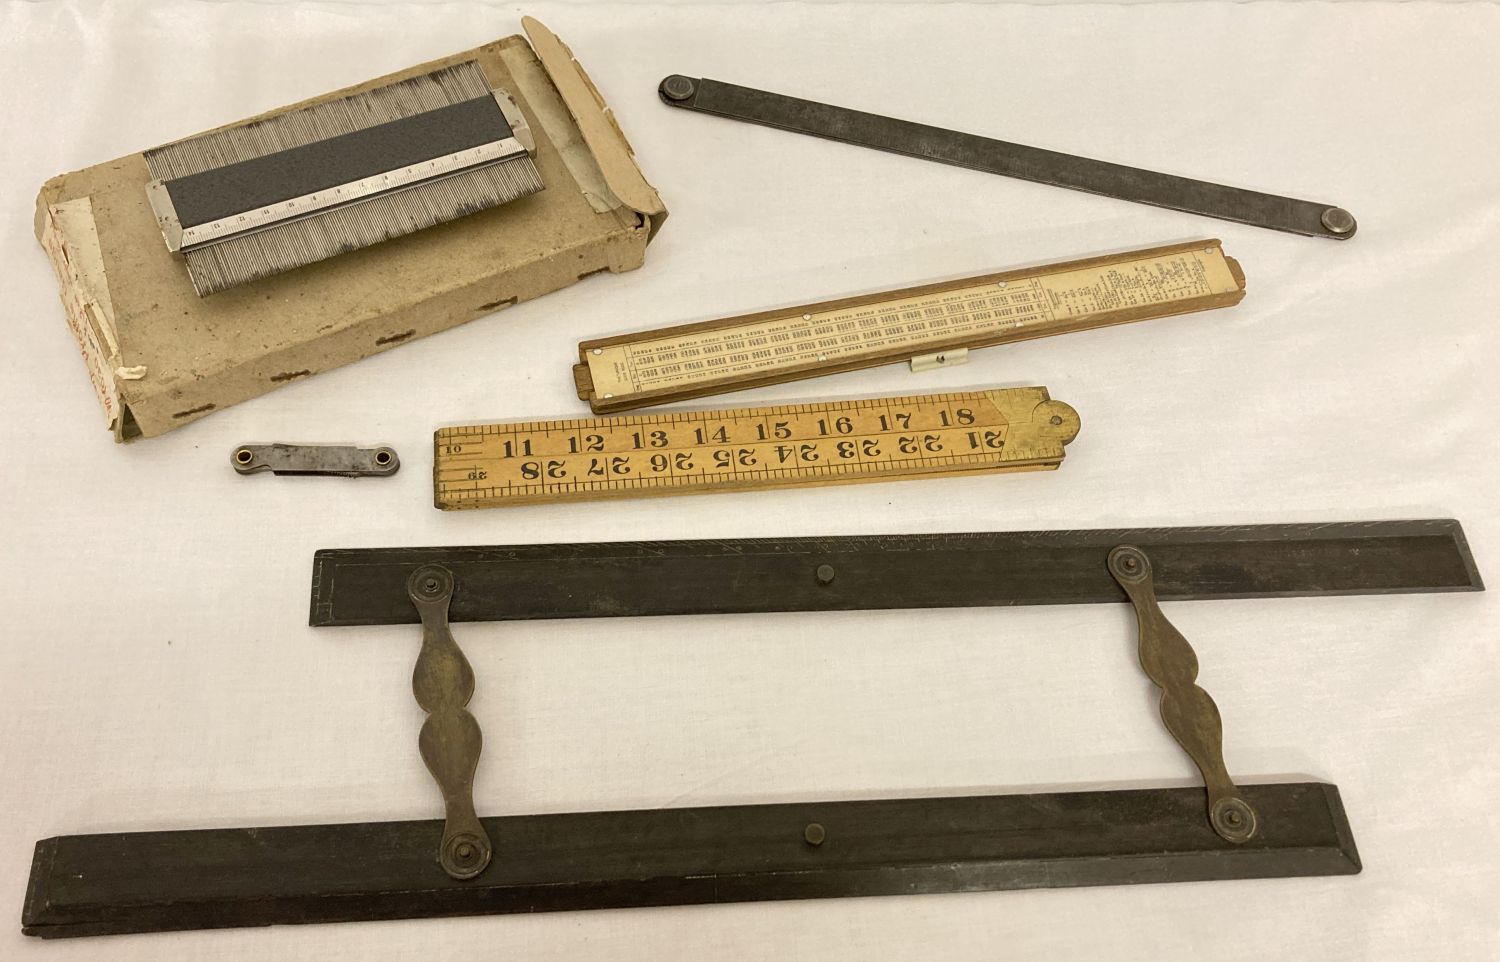 A collection of vintage rulers and measures.